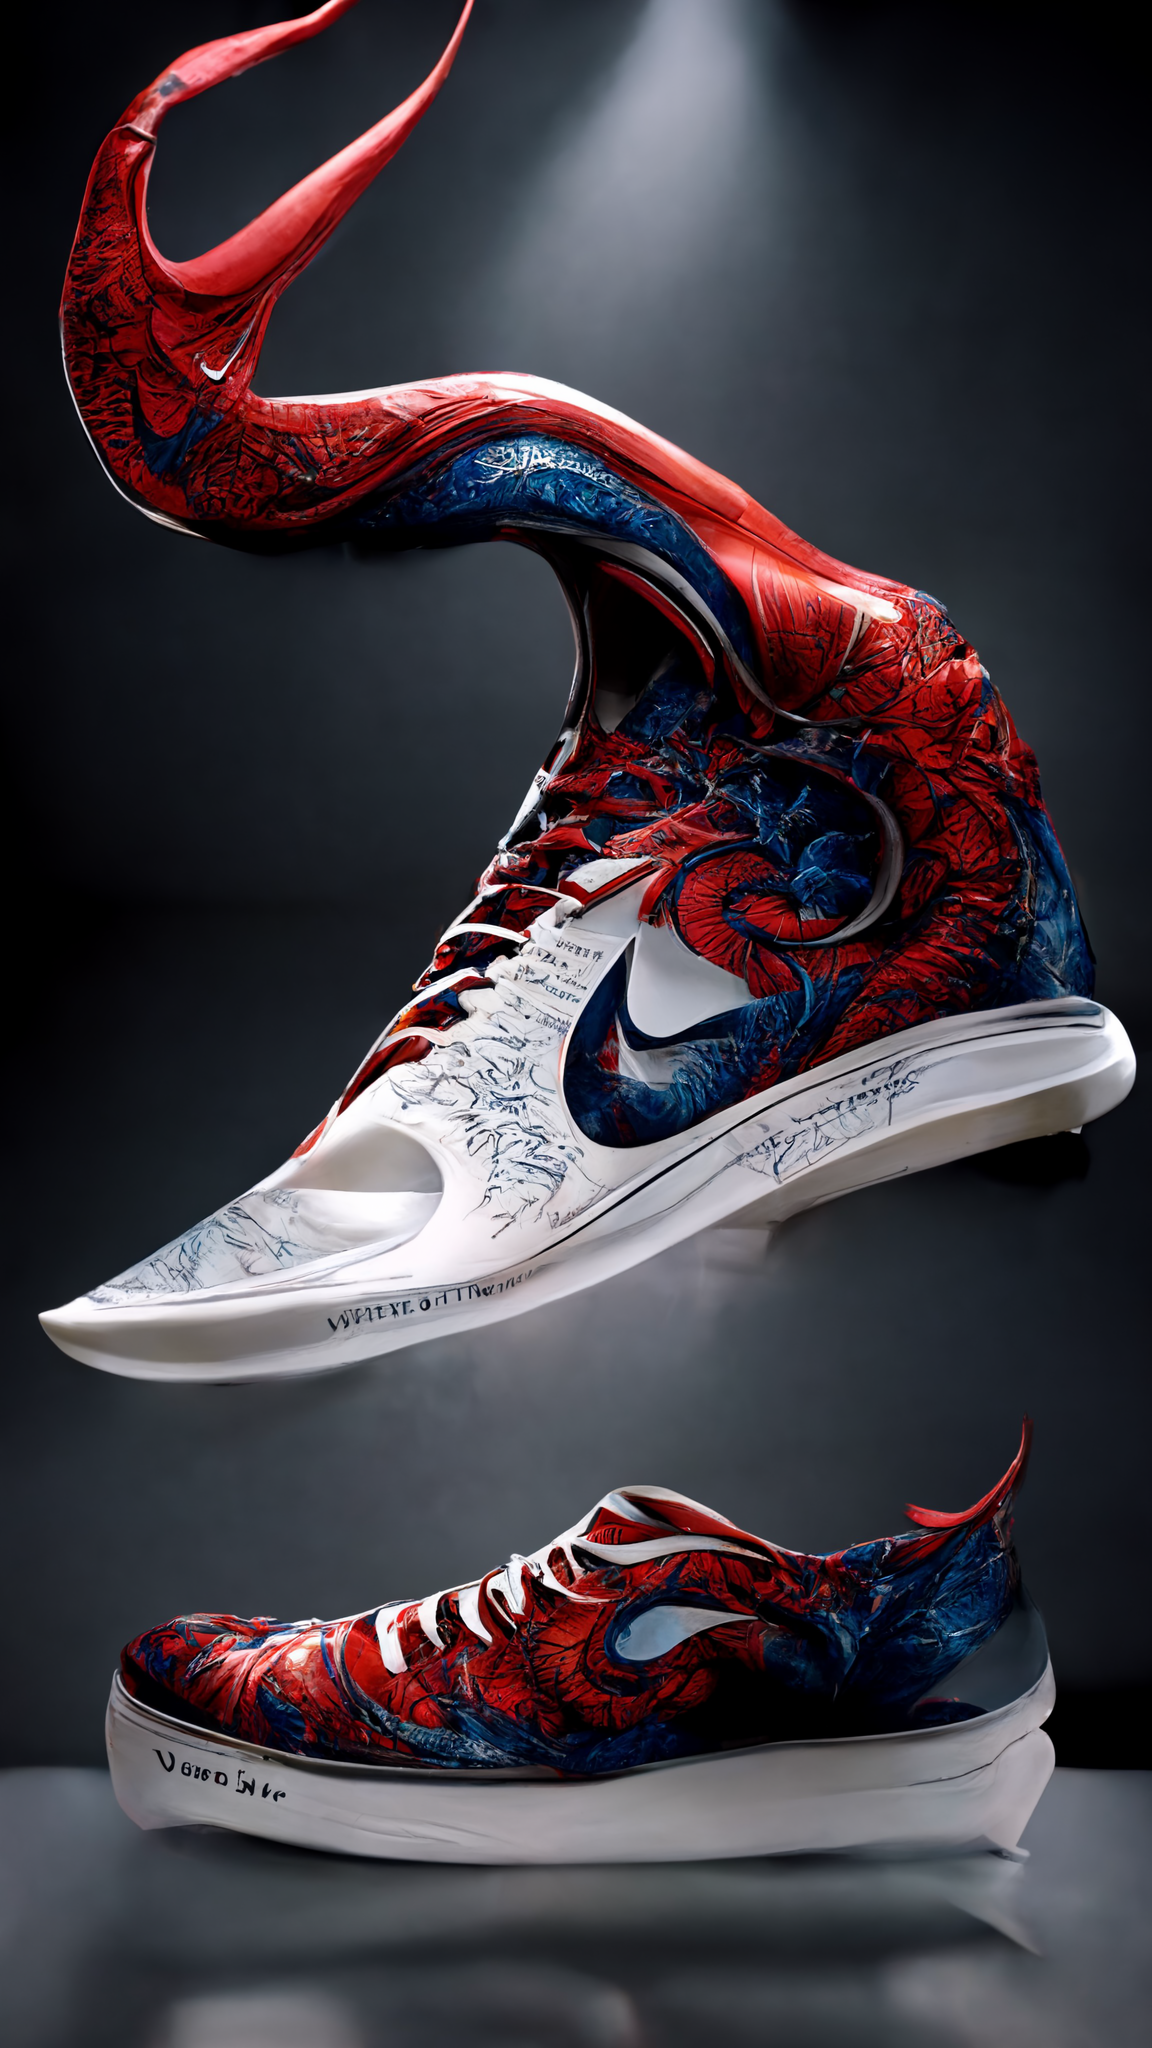 Nike + Collaborations